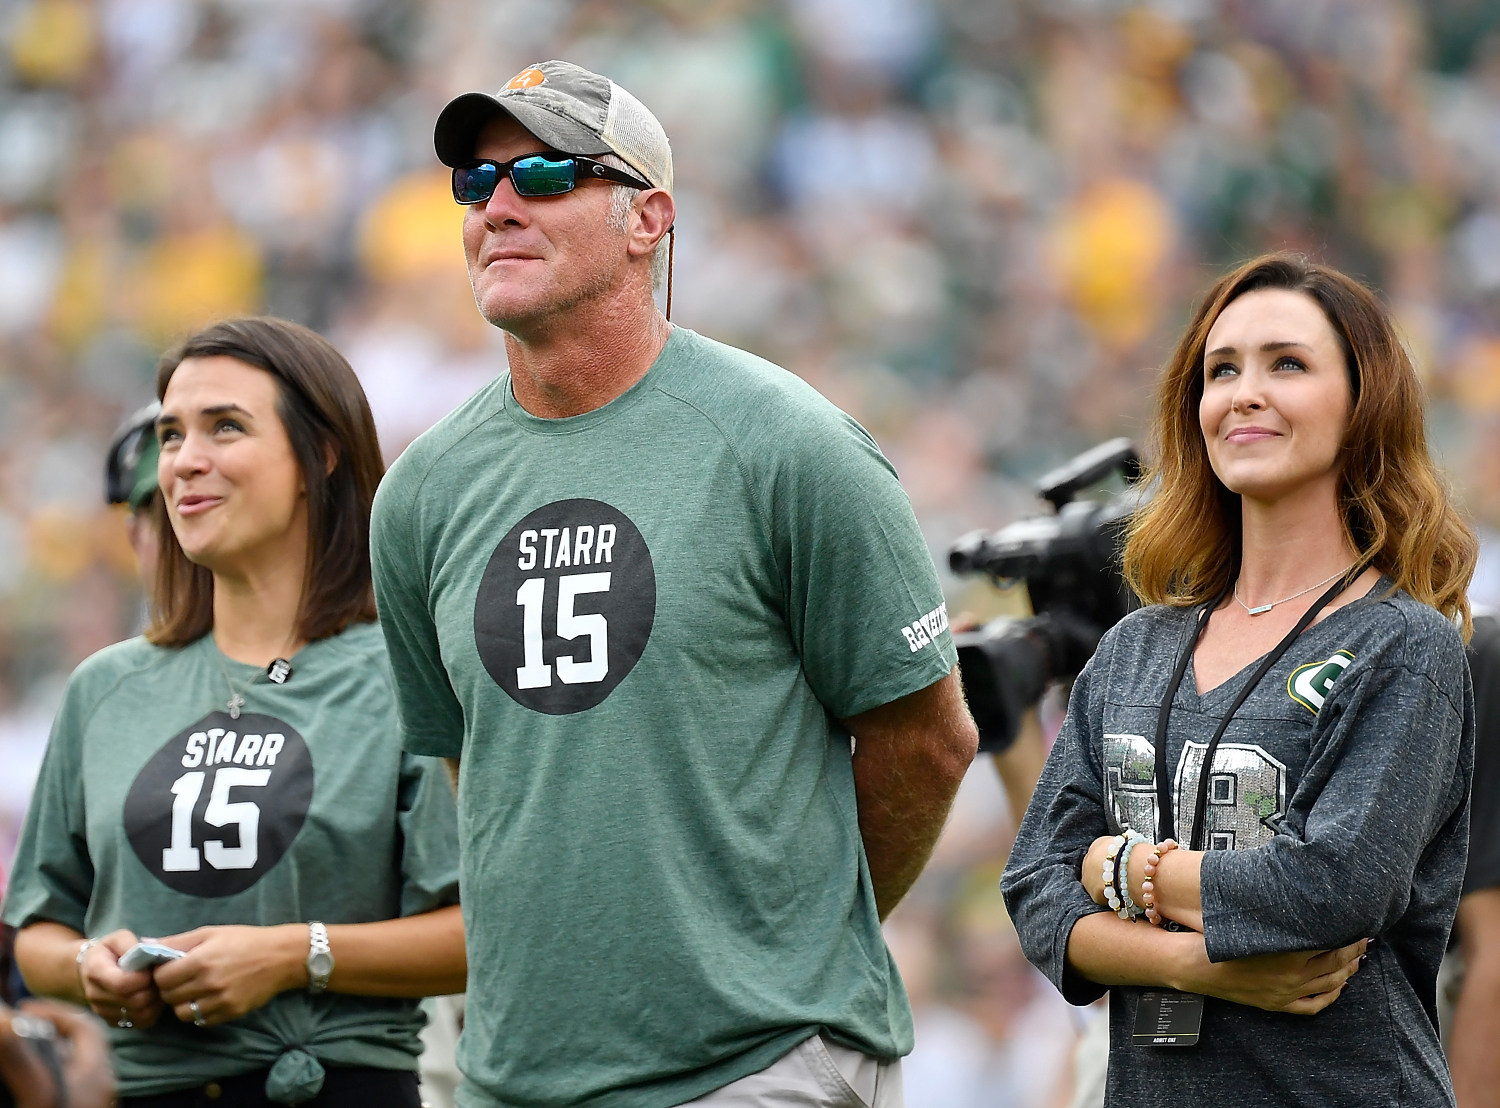 The Green Bay Packers are trying to win a Super Bowl with Aaron Rodgers. However, Brett Favre is now putting them on notice.